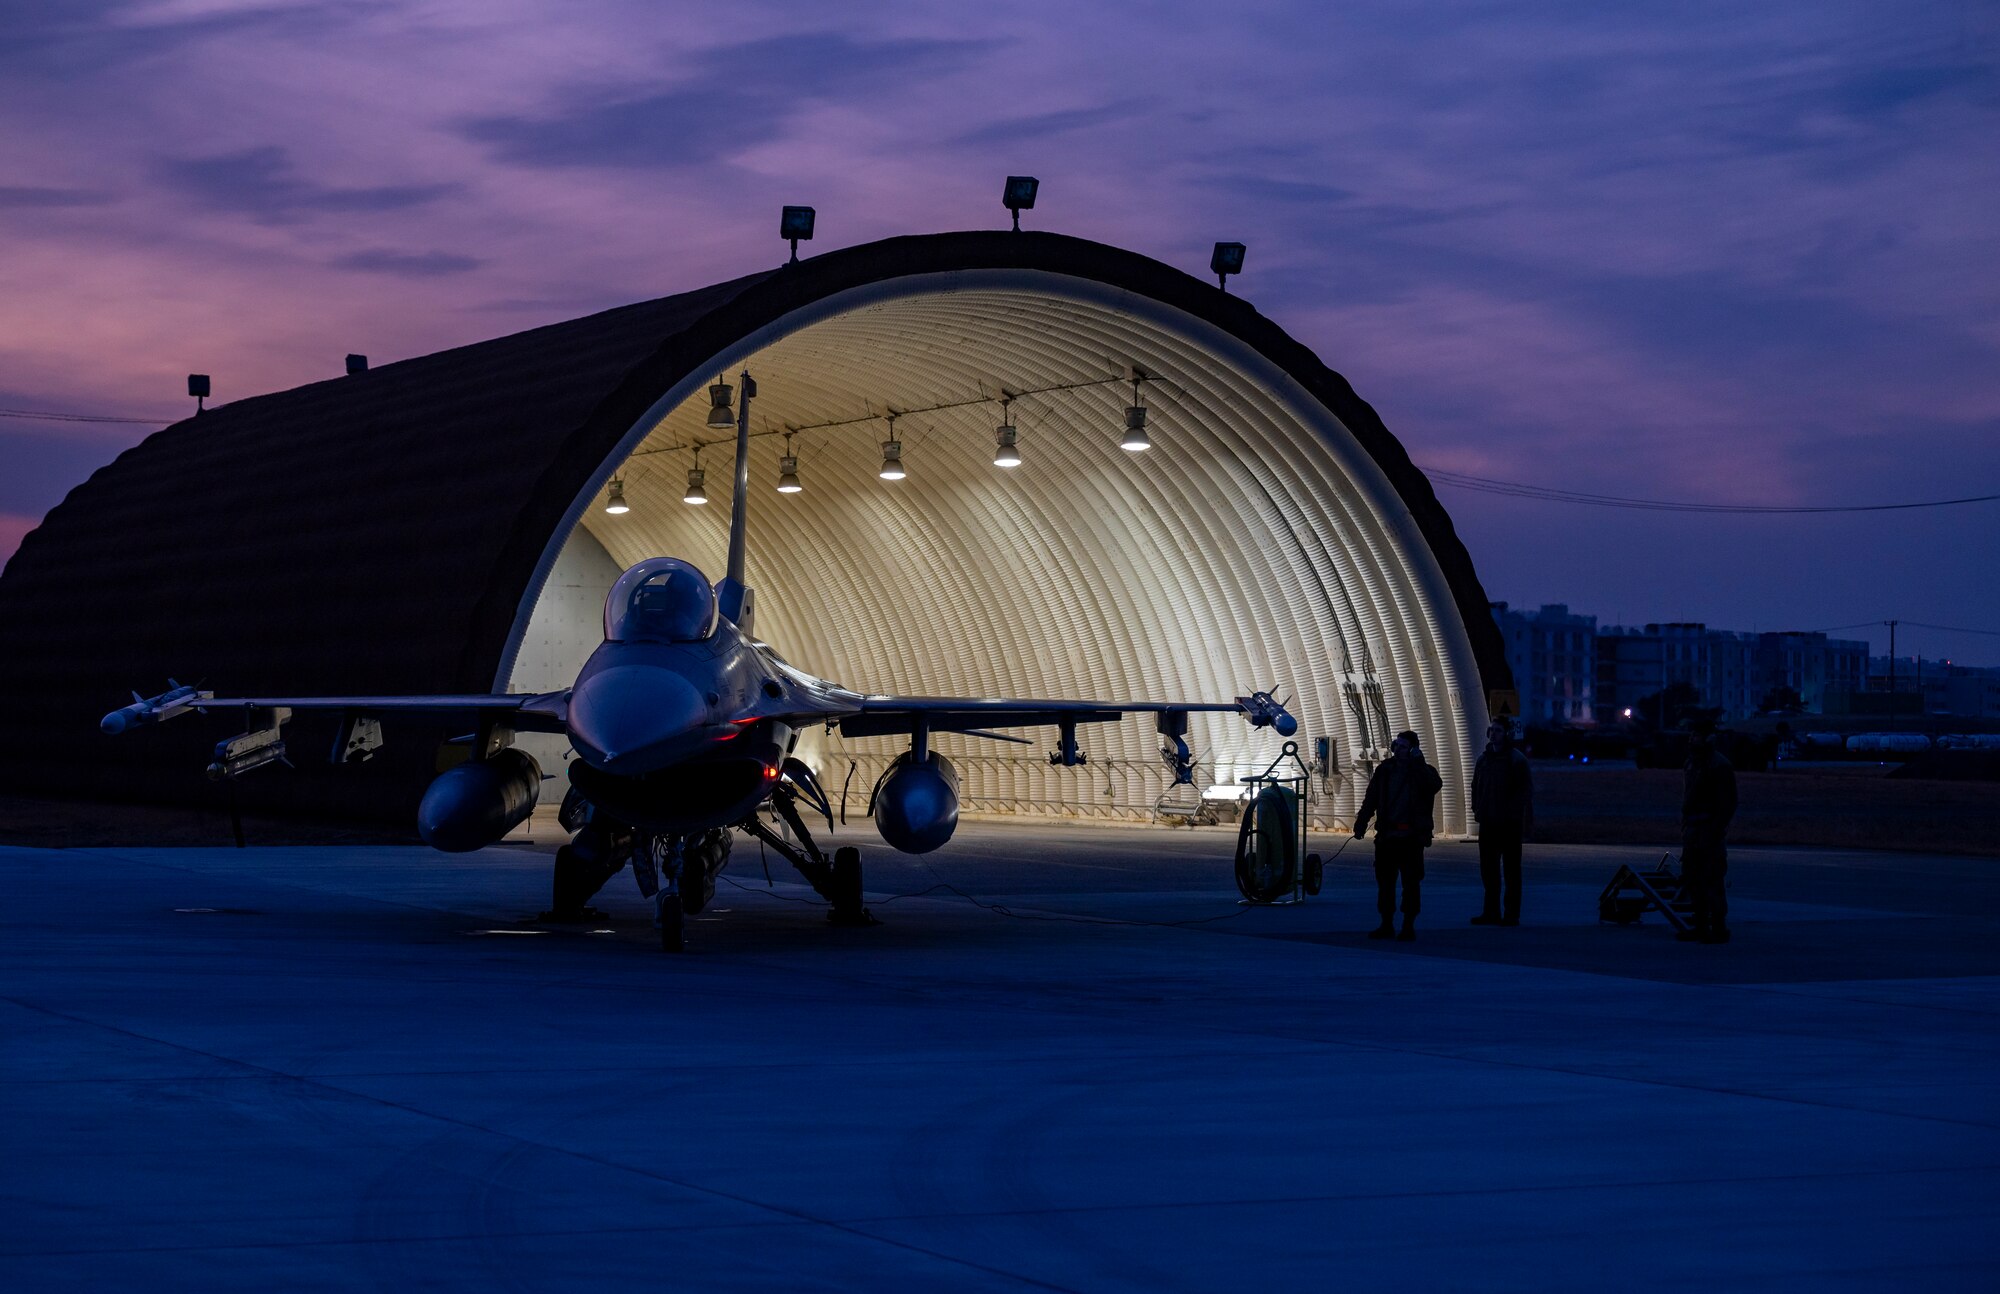 U.S. Air Force Airmen from the 51st Fighter Wing perform post-flight maintenance on an F-16 Fighting Falcon during a training event at Daegu Air Base, Republic of Korea, Feb. 2, 2023.